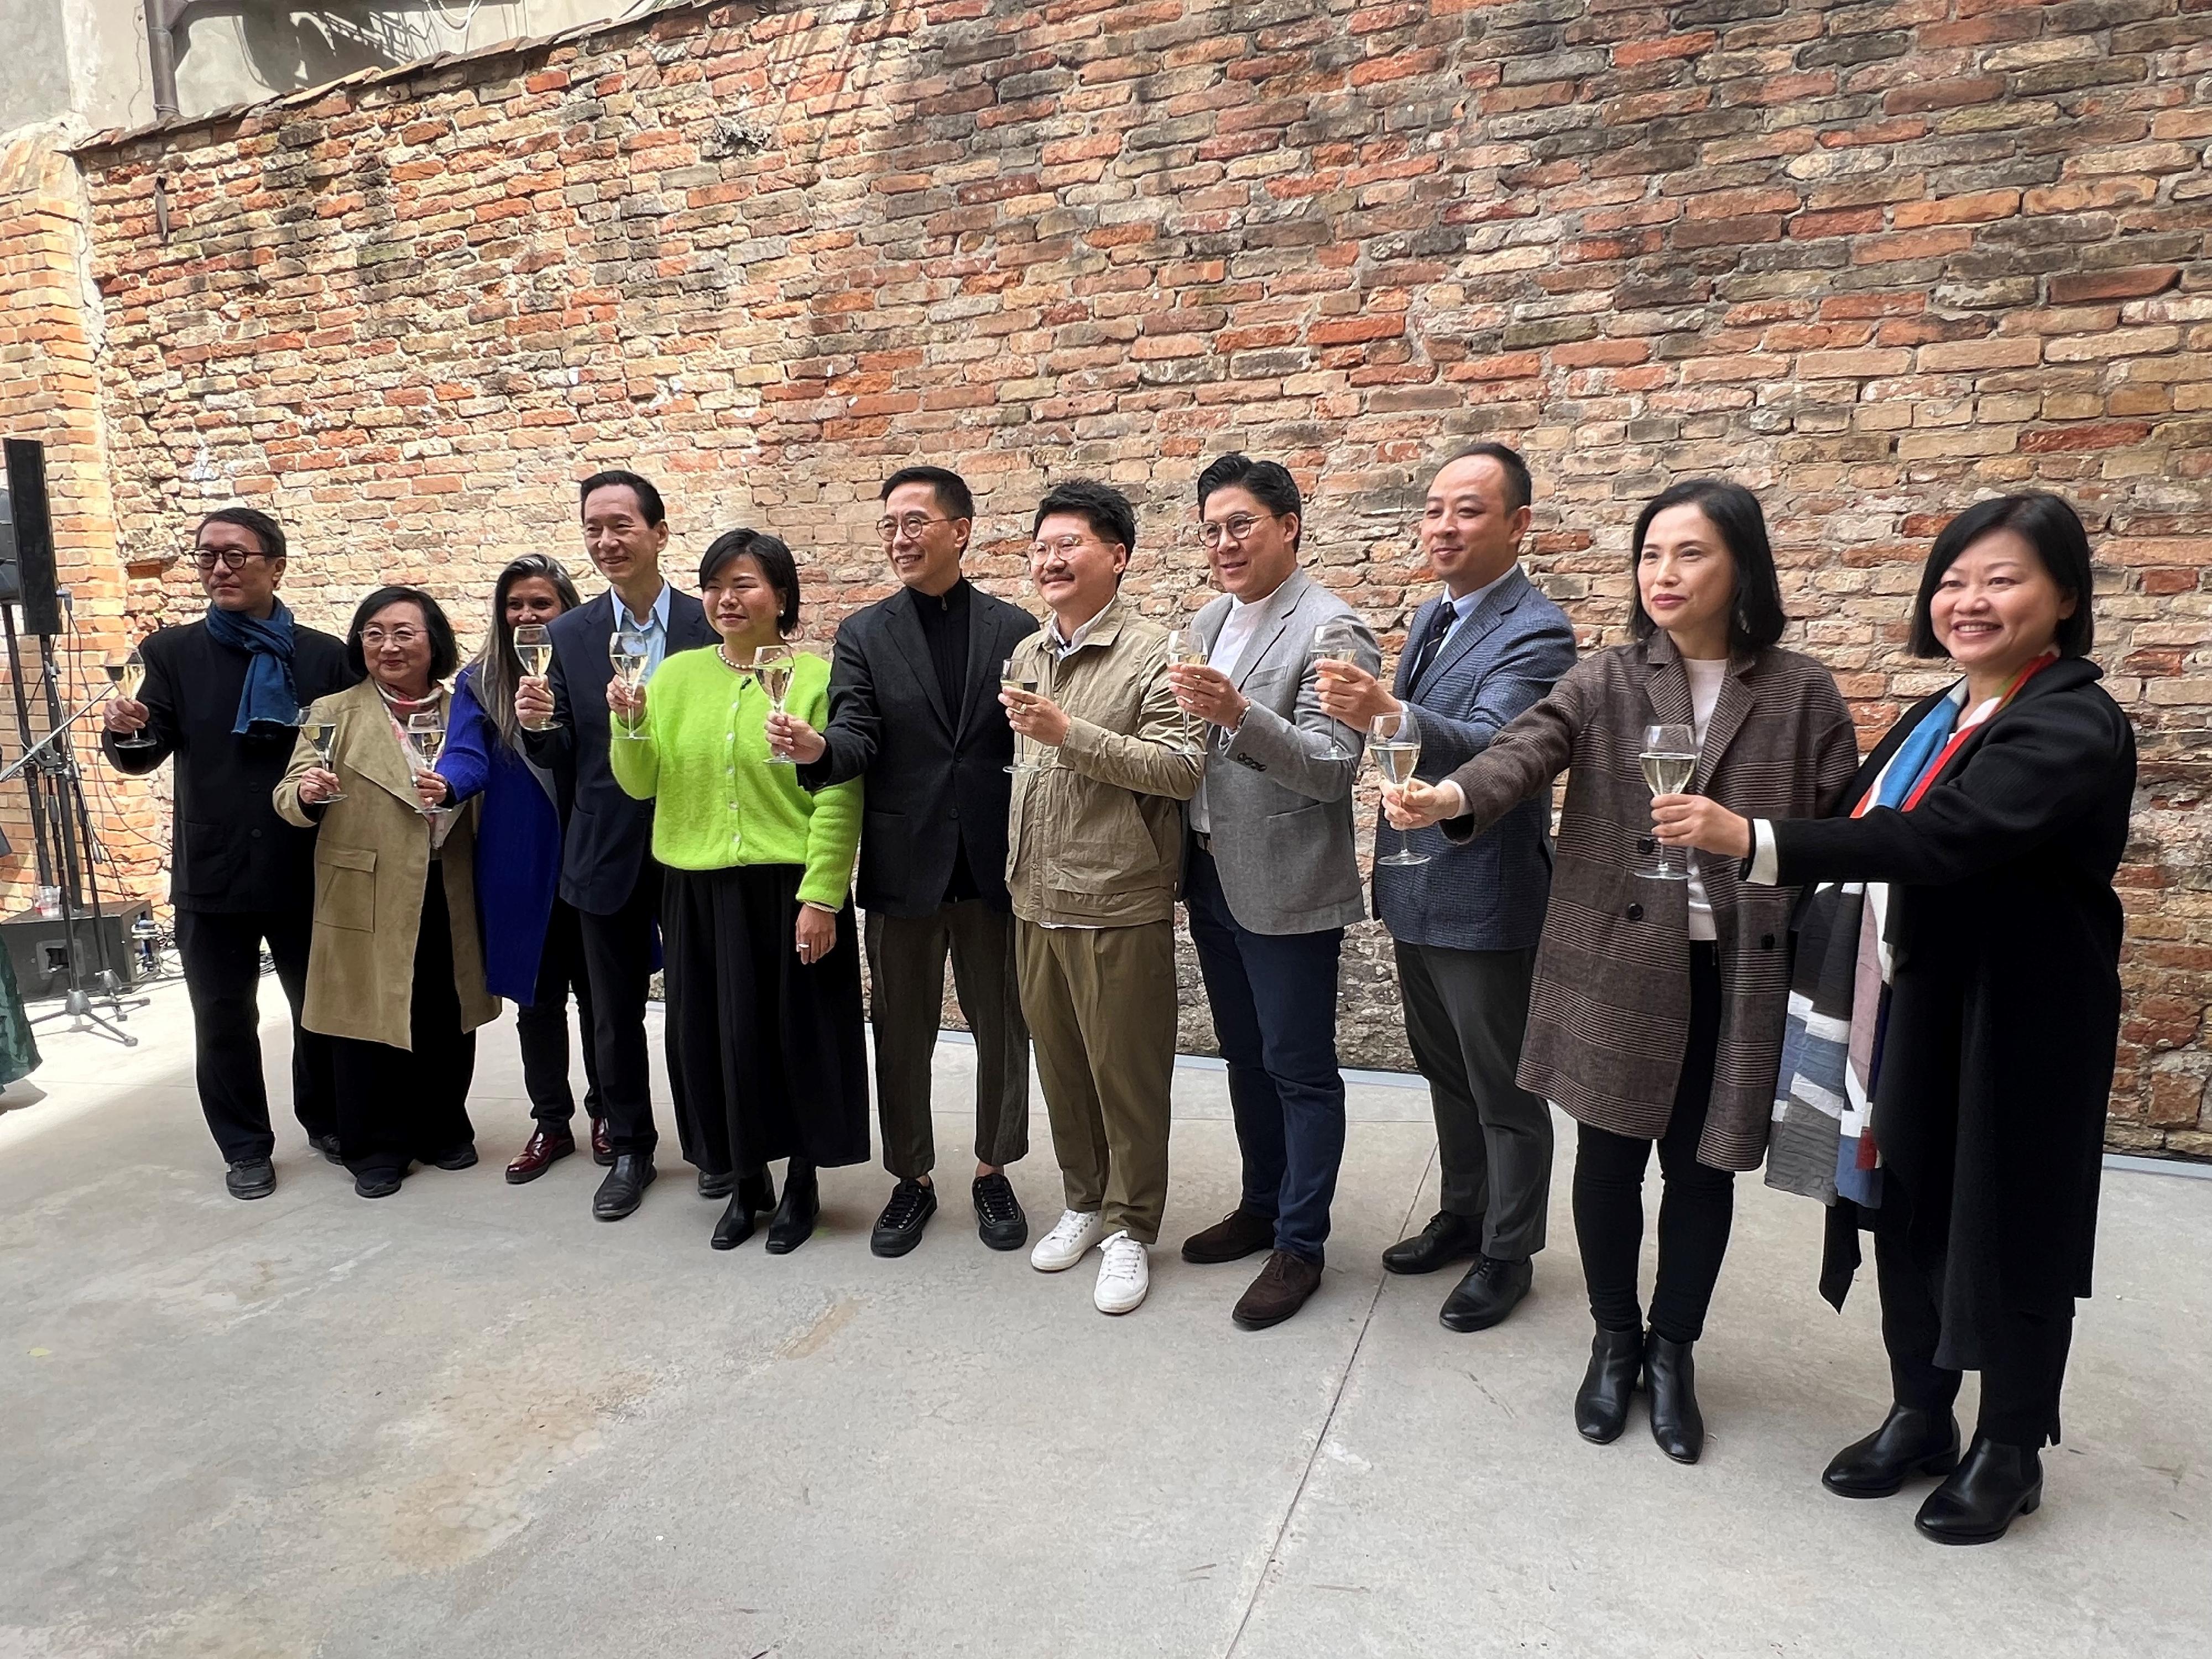 The Secretary for Culture, Sports and Tourism, Mr Kevin Yeung, officiated at the opening ceremony of the Hong Kong exhibition at the Venice Biennale in Venice, Italy, yesterday (April 19, Venice time). Photo shows Mr Yeung (centre) giving a toast with guests including the Chairman of the M+ Board, Mr Bernard Charnwut Chan (fourth left); the Chief Executive Officer of the West Kowloon Cultural District Authority, Mrs Betty Fung (second right); the Chairman of the Hong Kong Arts Development Council, Mr Kenneth Fok Kai-kong (fourth right); Hong Kong artist Trevor Yeung (fifth right), and curator Olivia Chow (fifth left). 